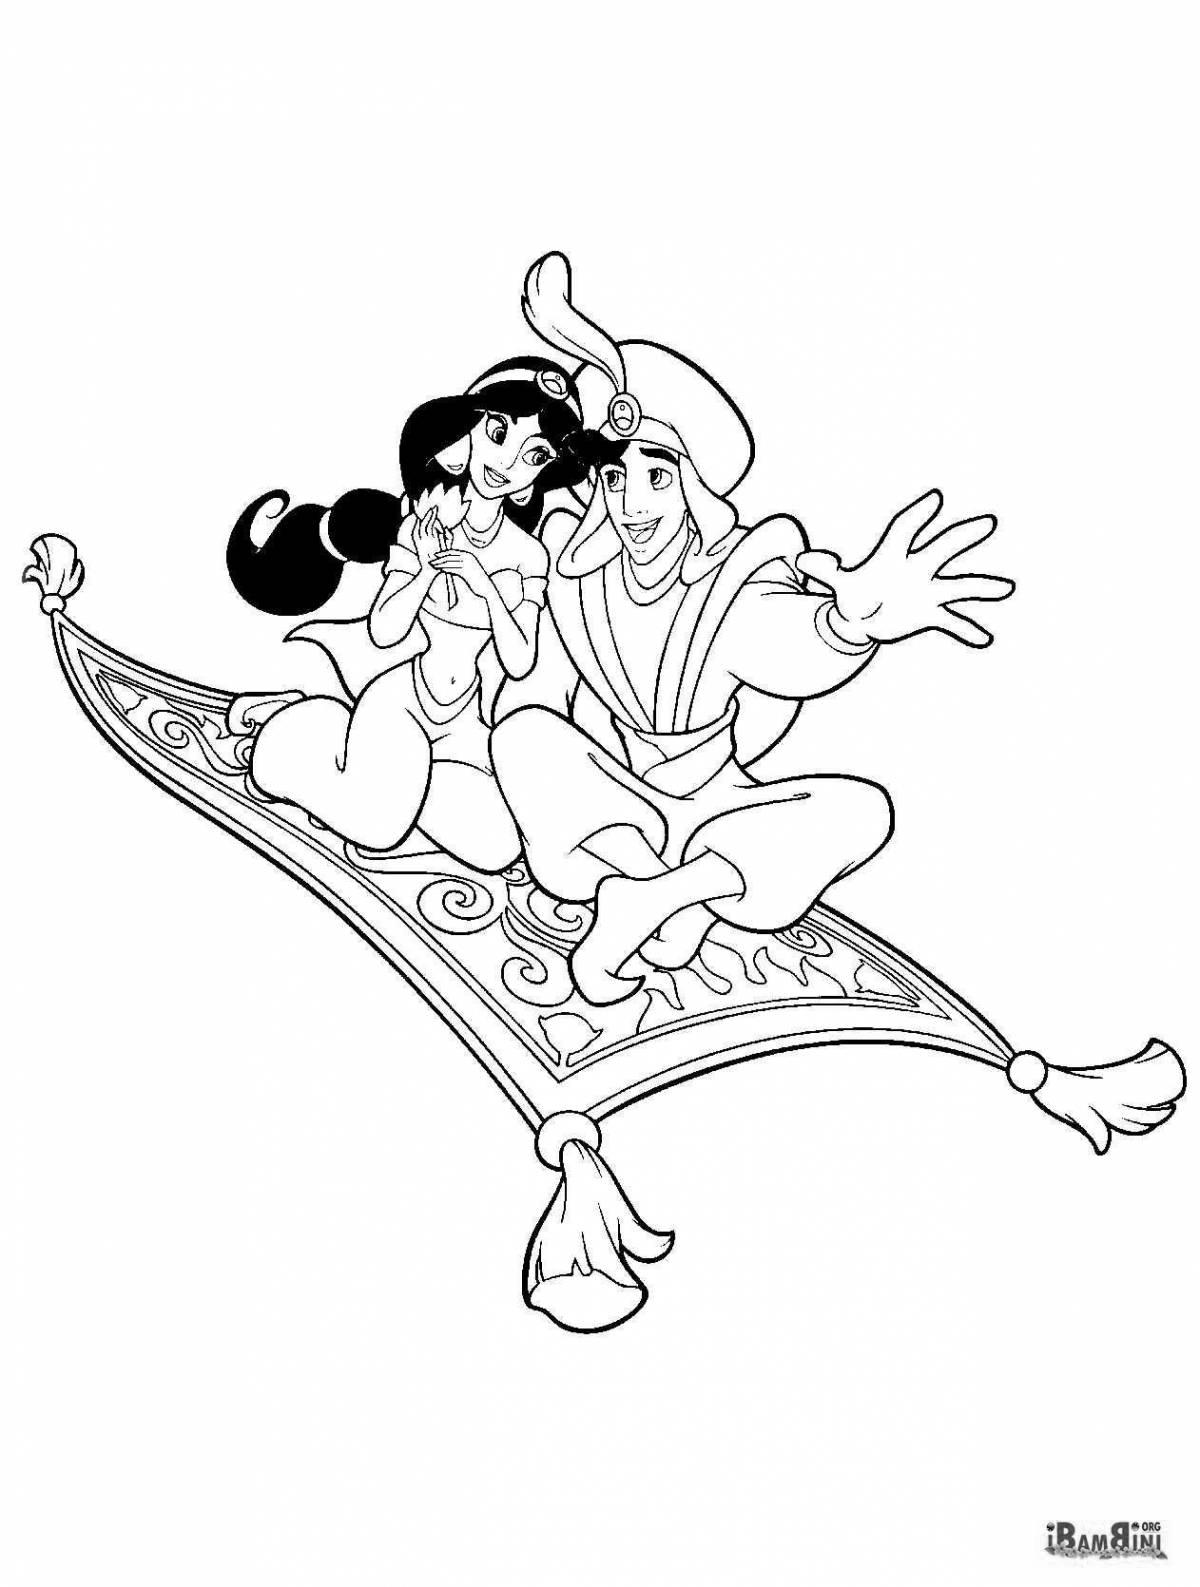 Decorated flying carpet coloring page